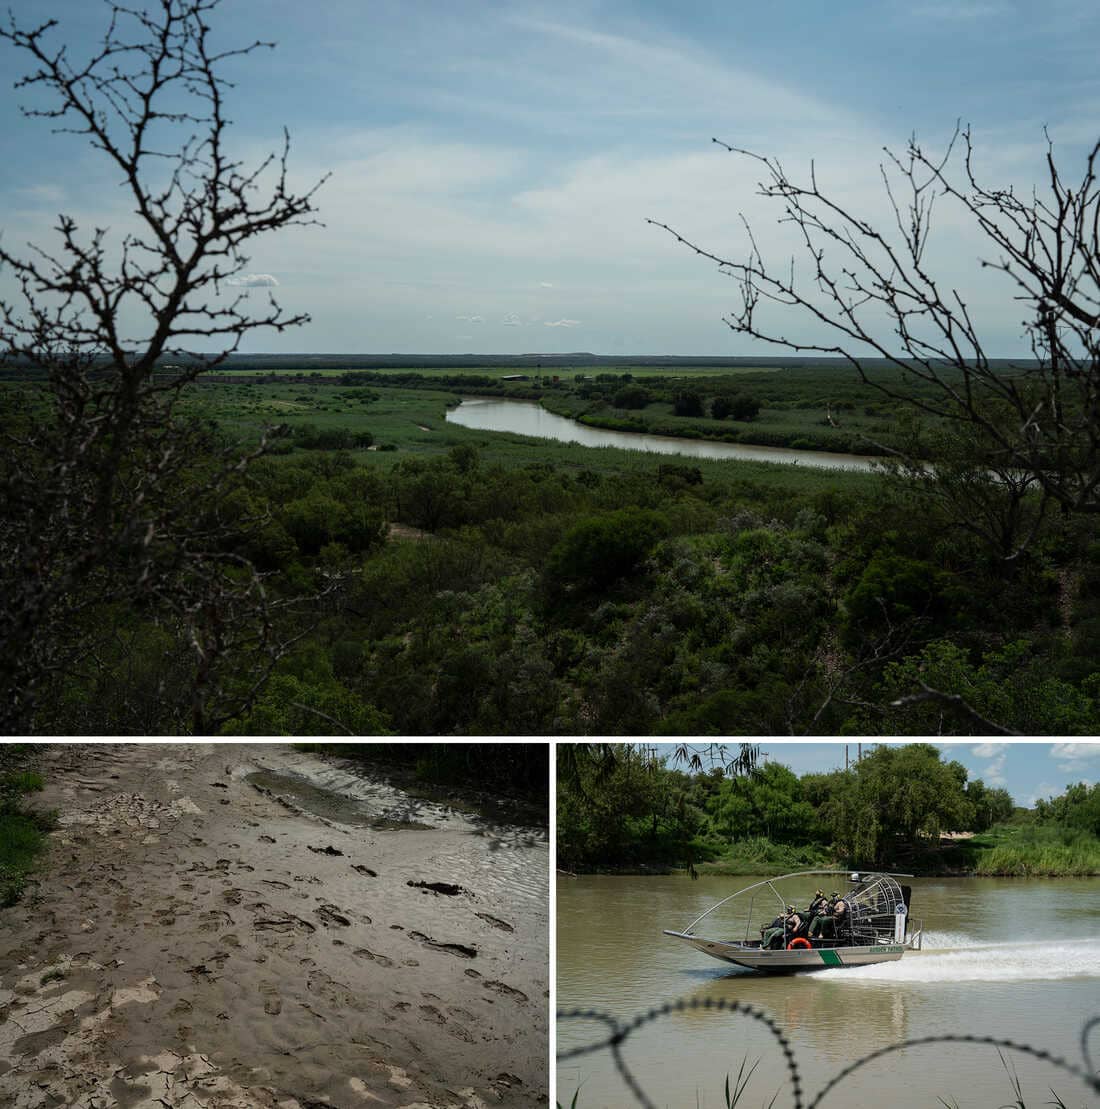 A dramatic shift at the border as migrants converge on a remote corner of South Texas